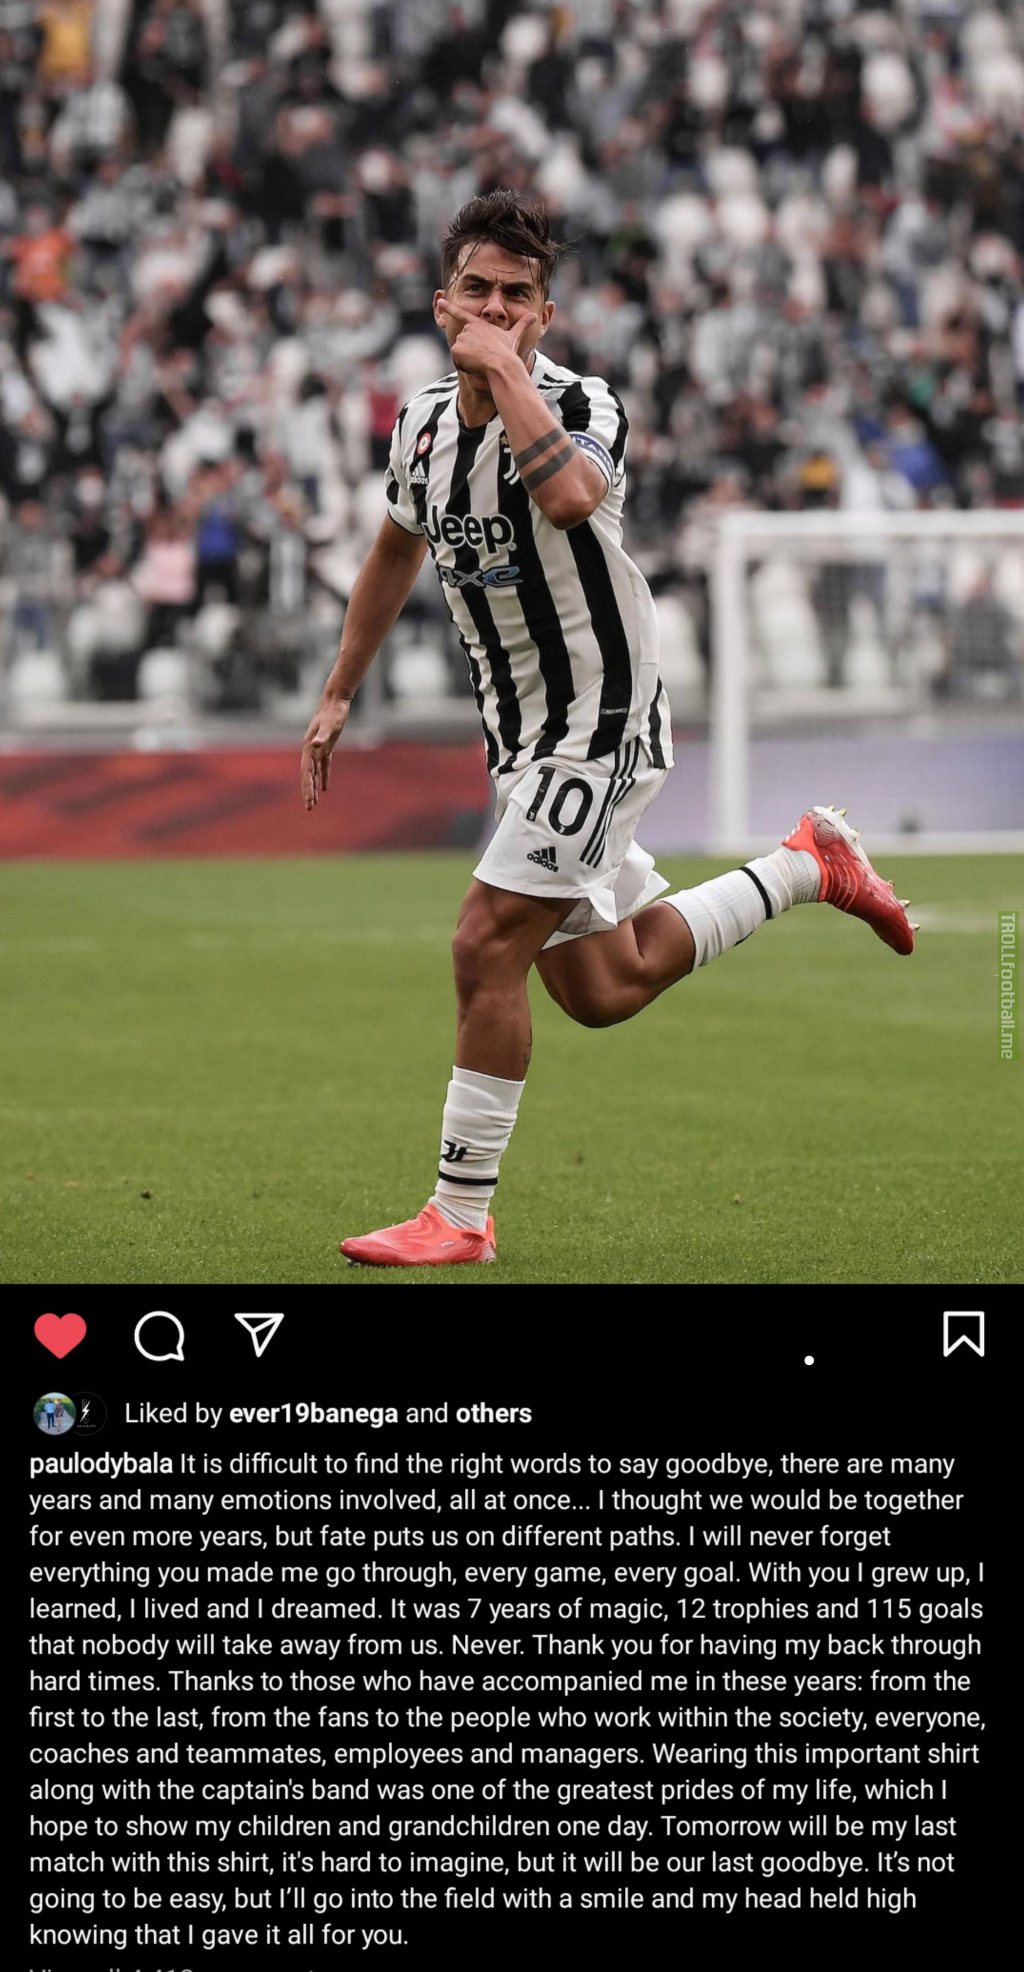 Dybala announces that he'll be leaving Juventus